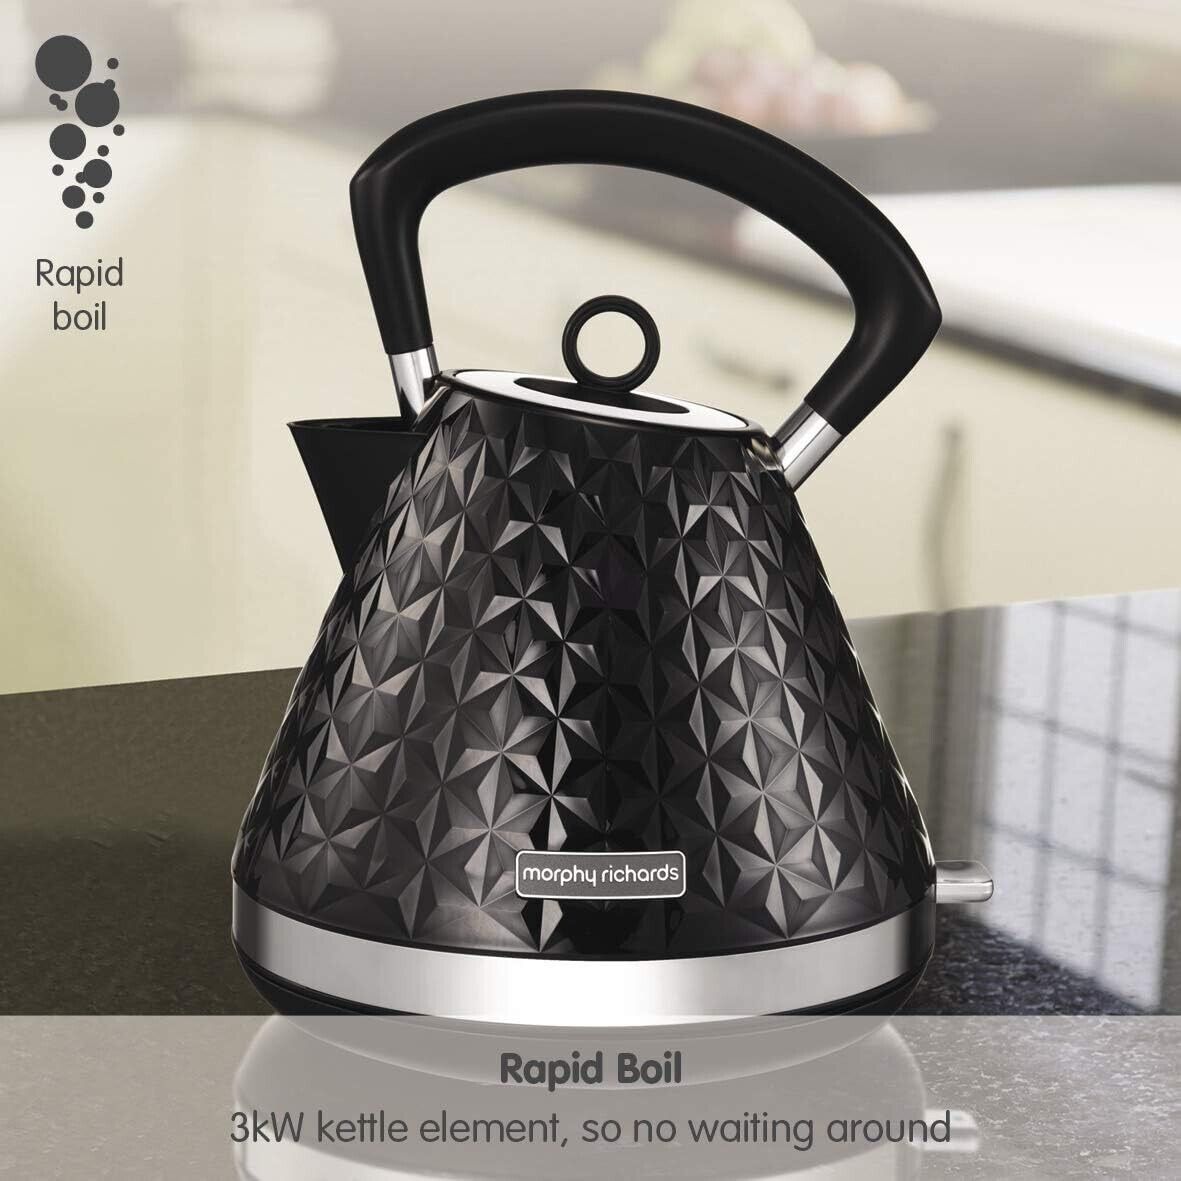 Morphy Richards Vector 1.5L 3KW Pyramid Kettle in Black 108131 2 Year Guarantee